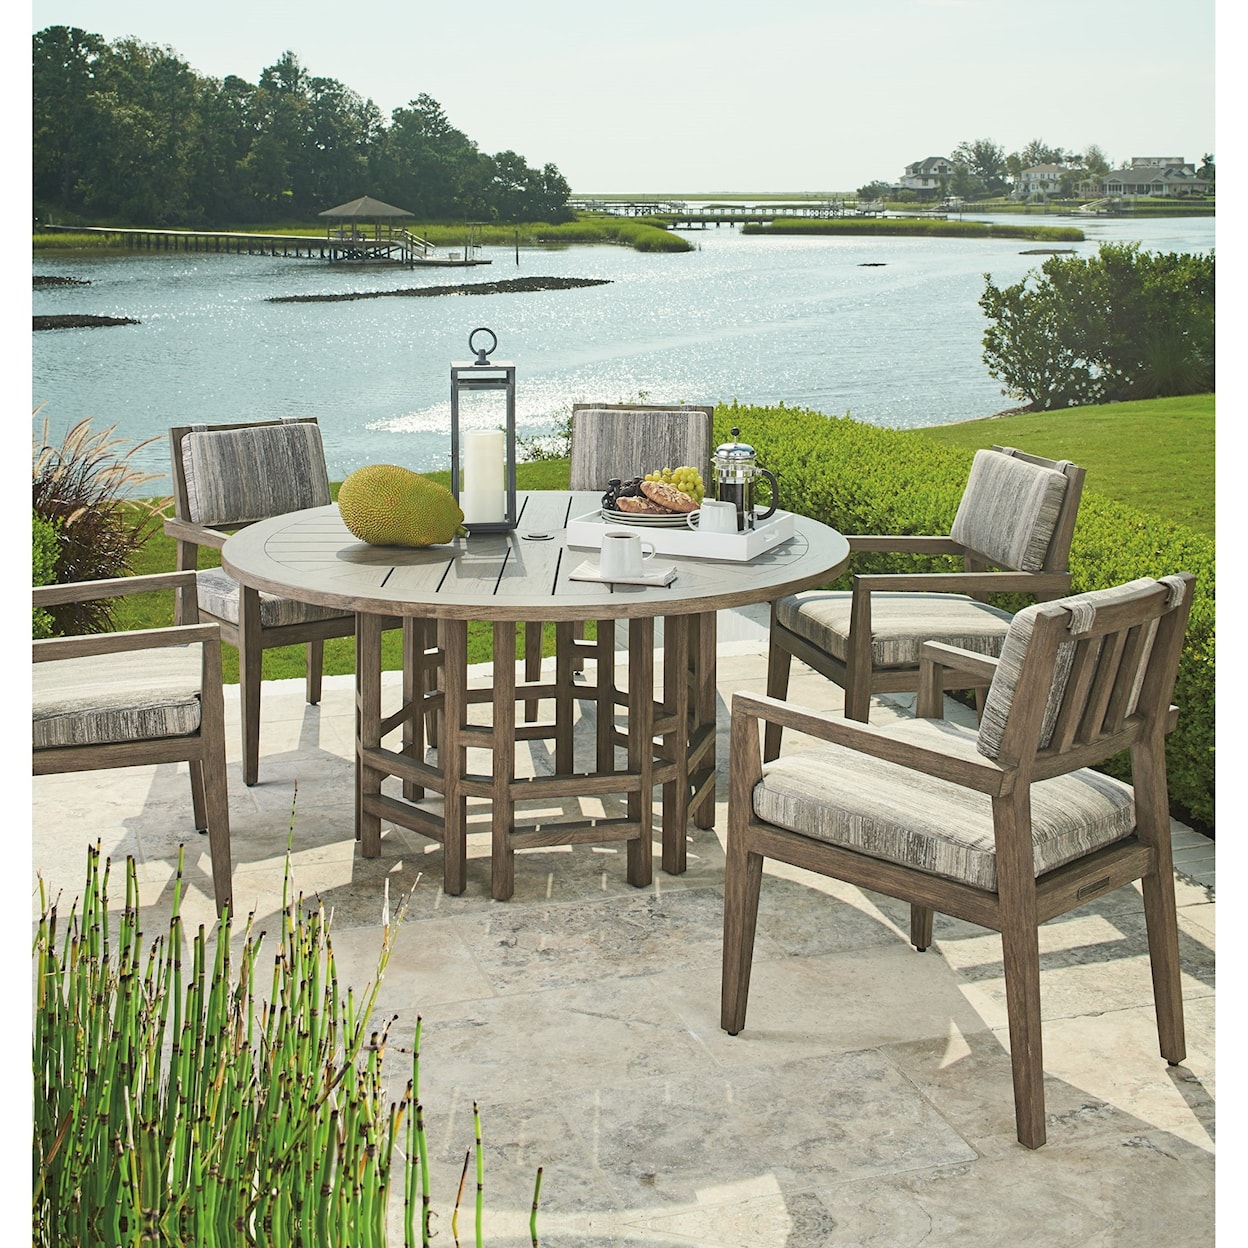 Tommy Bahama Outdoor Living La Jolla Round Dining Table